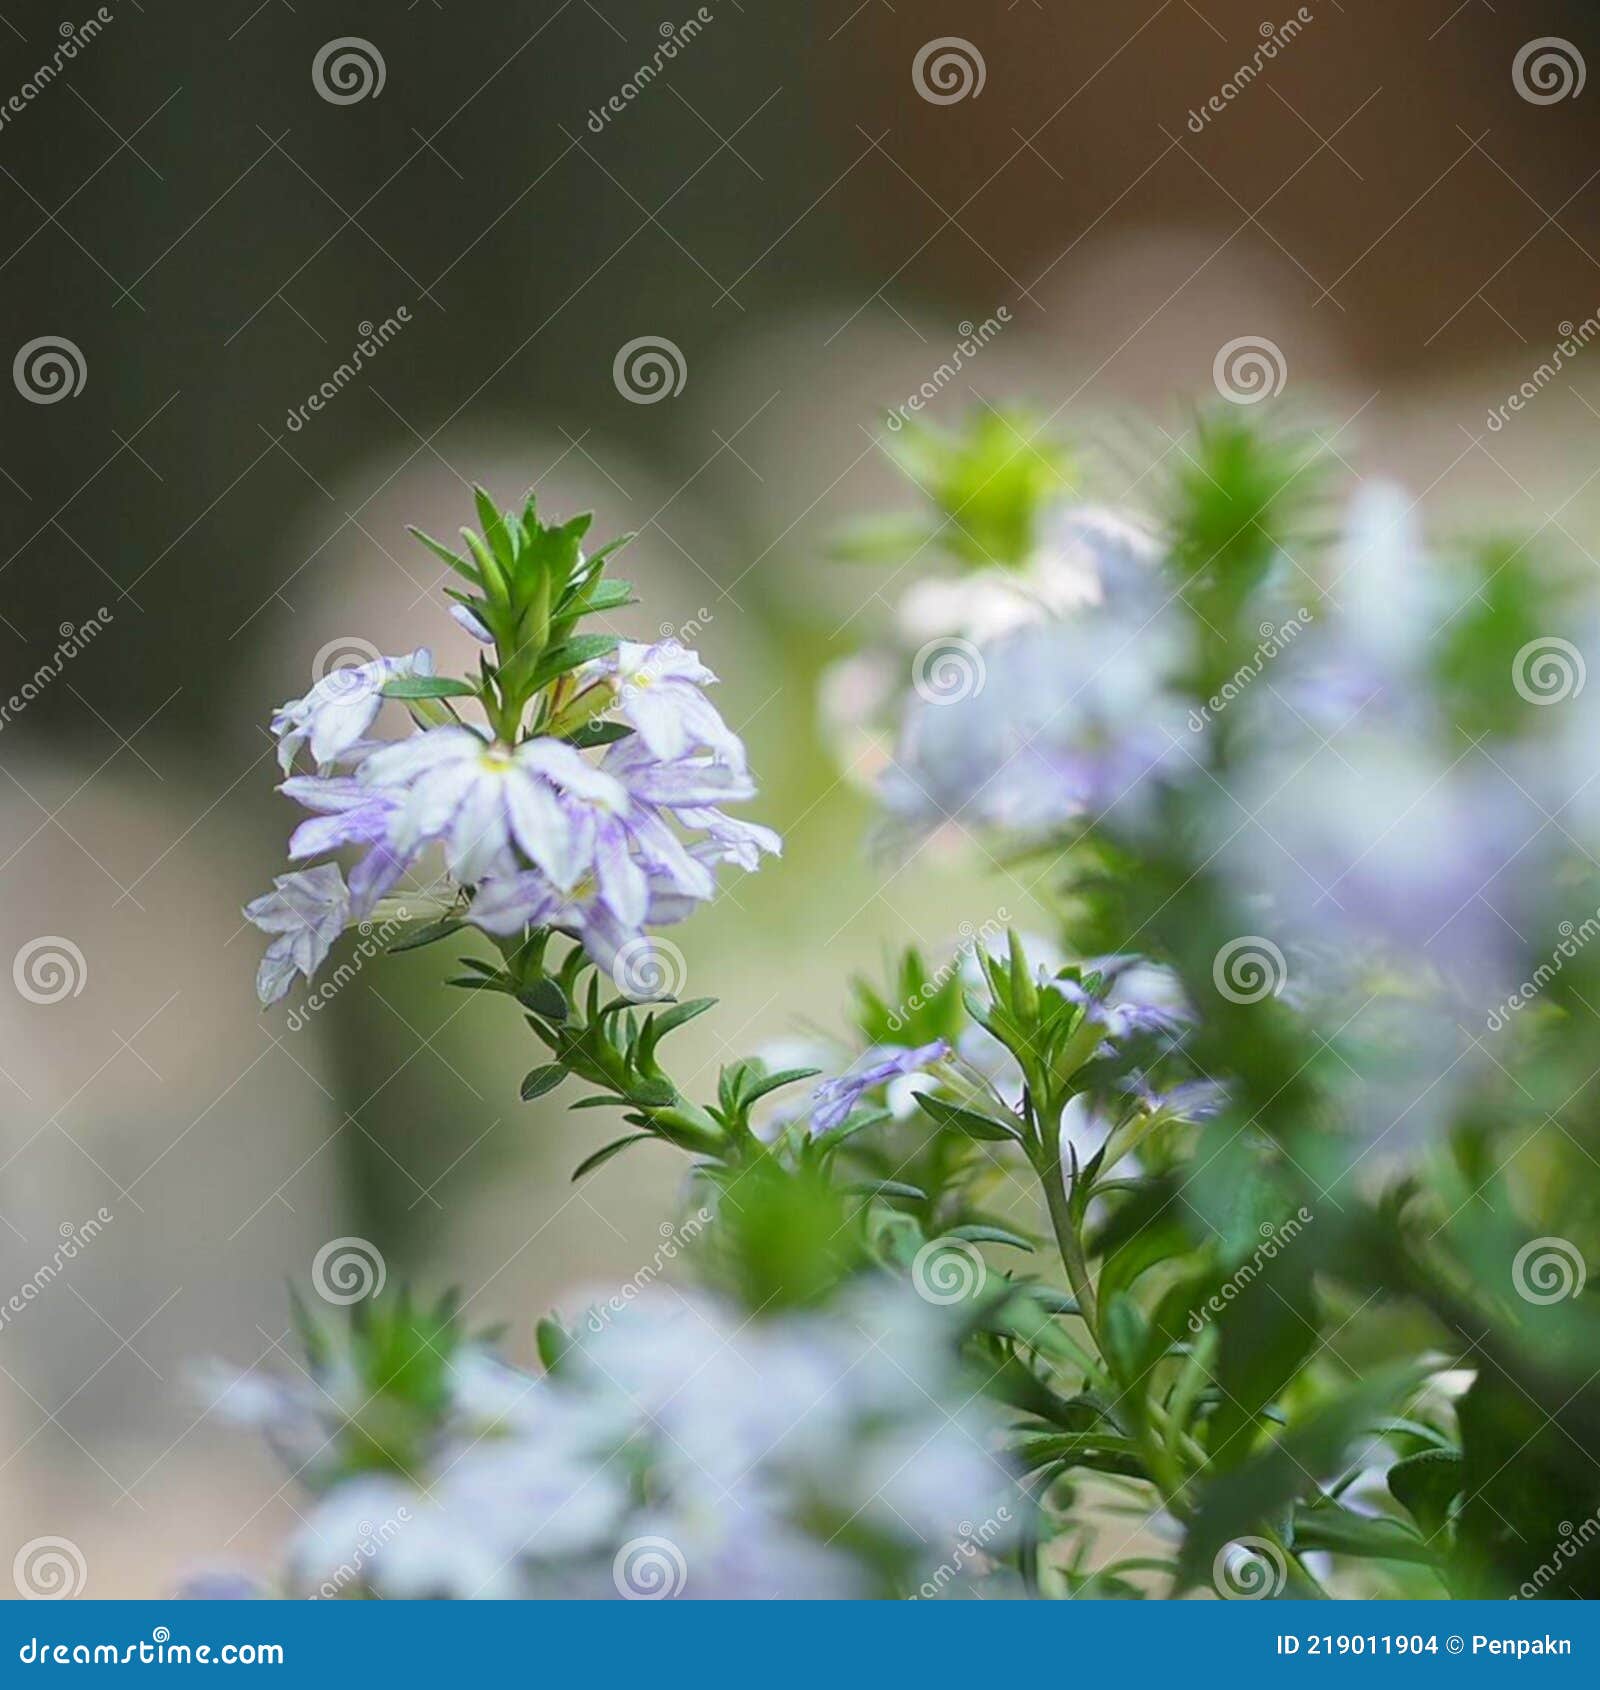 scaevola aemula, blue fairy fan flower blooming in garden on blurred of nature background, family goodeniaceae plant